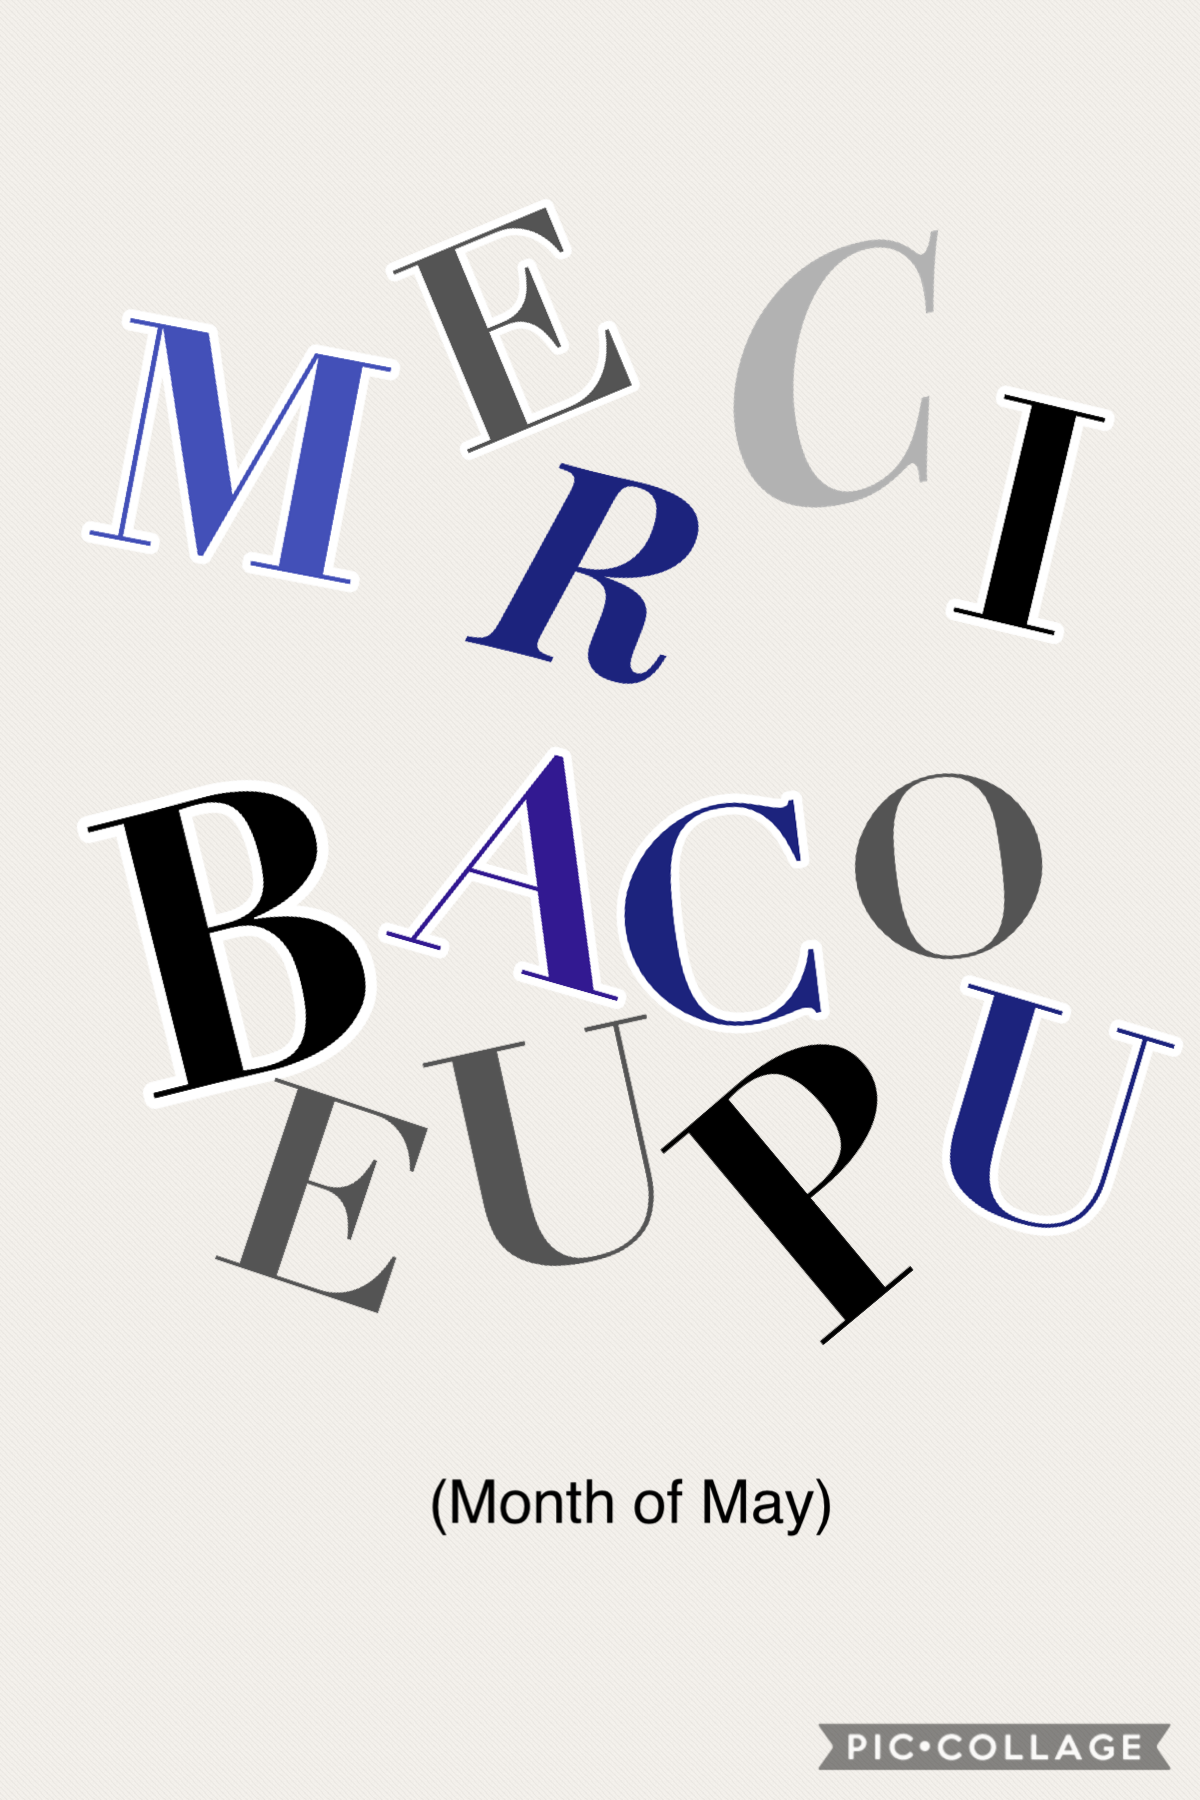 Merci Beaucoup 
It’s been a while since the last series...